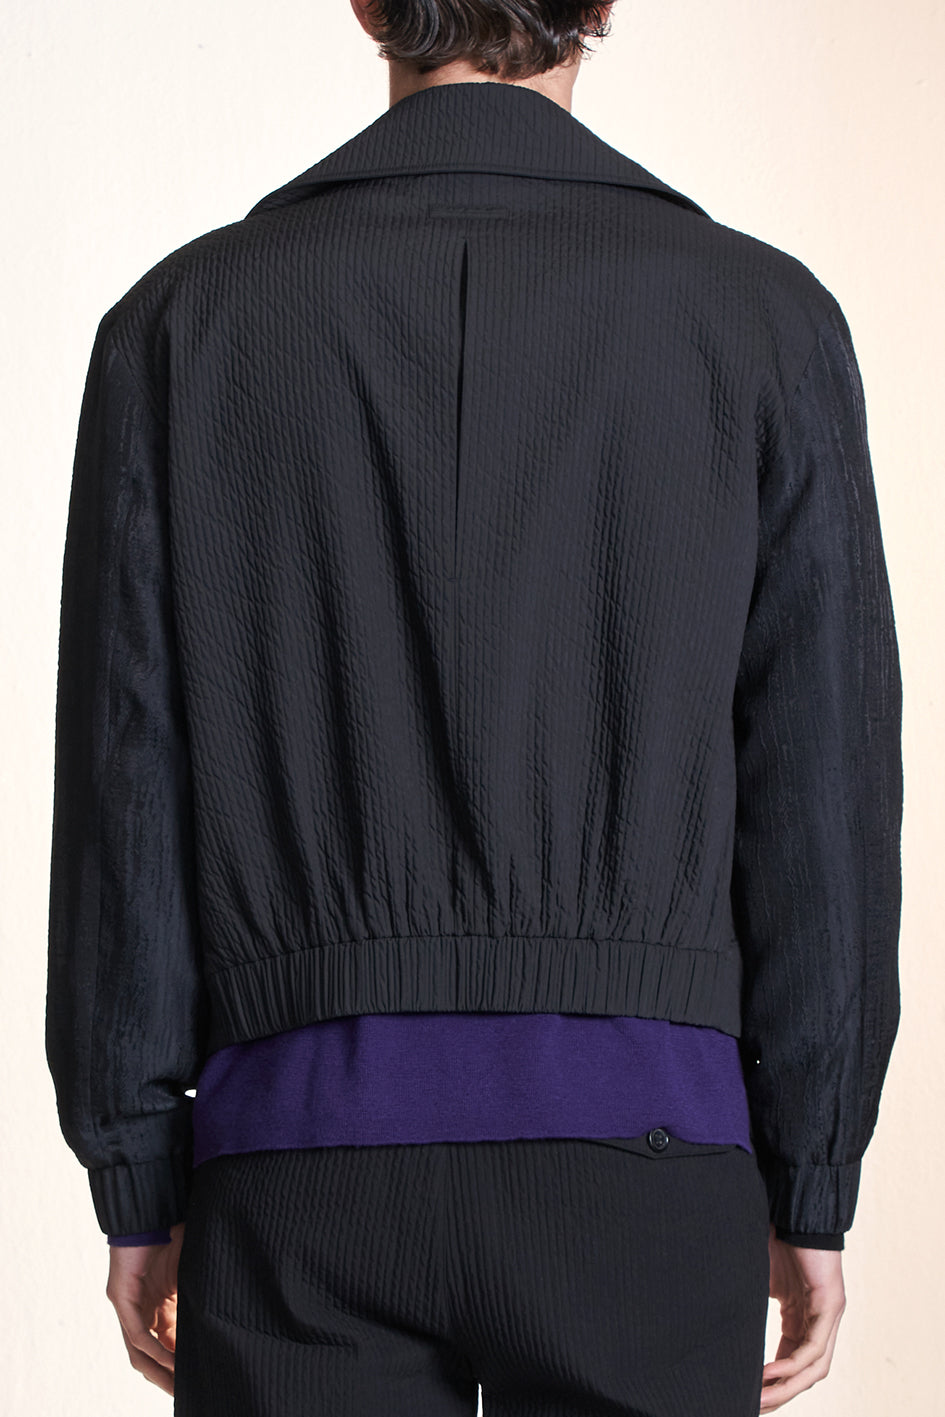 Textured Zipper Jacket With Stand Collar